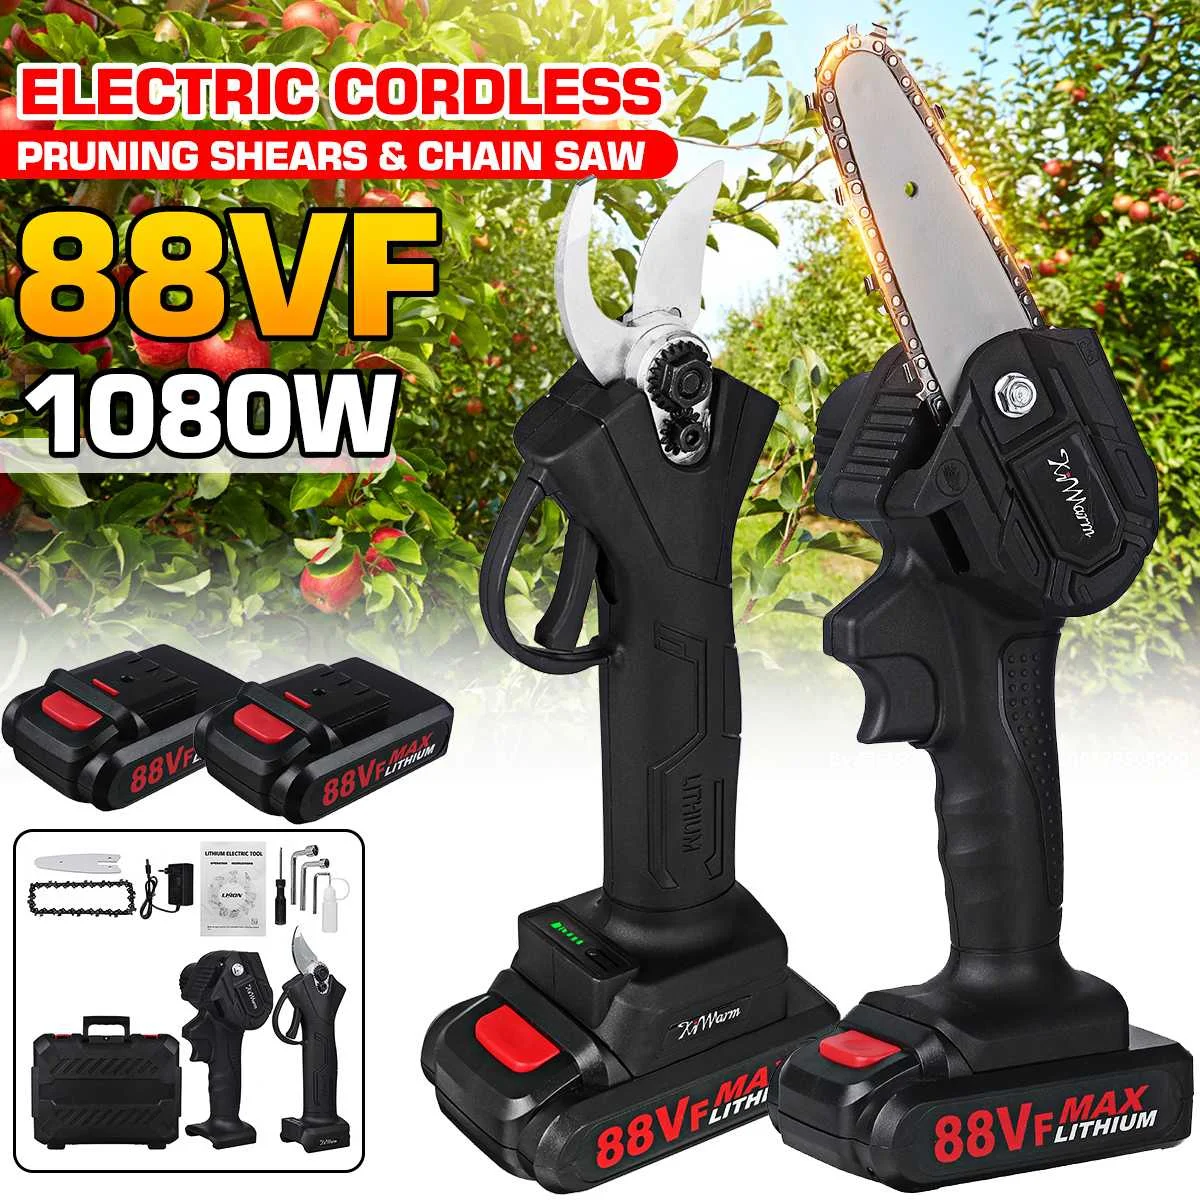 188VF 1080W Cordless Electric Chain Saw Pruner Electric Pruning Shear Wood Cutter Power Tool Branches Cutter Set With Battery